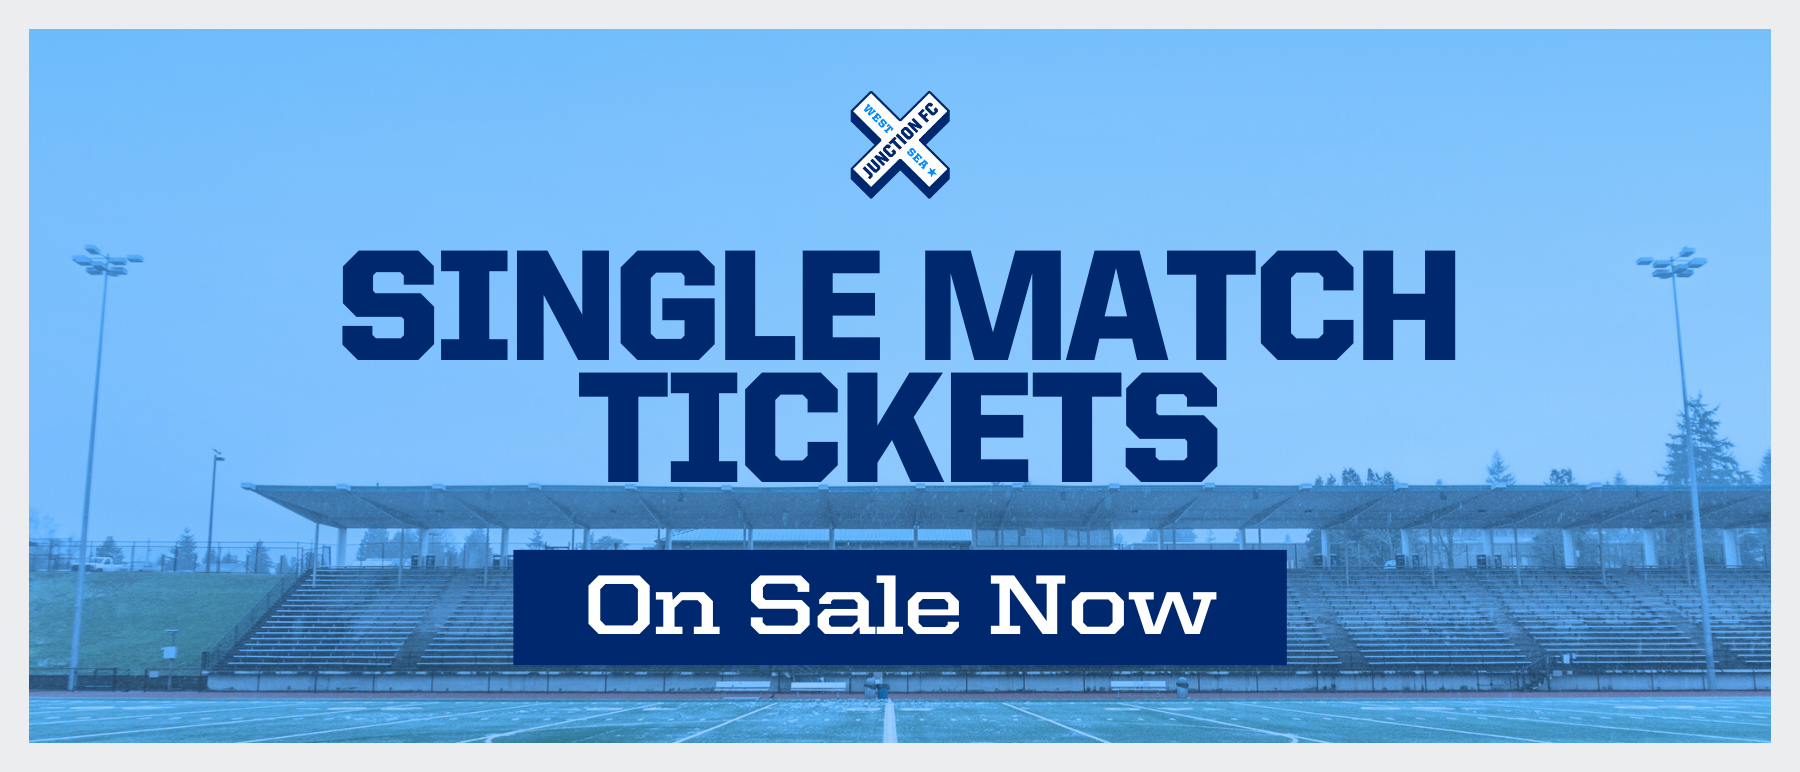 Single Match Tickets On Sale Now